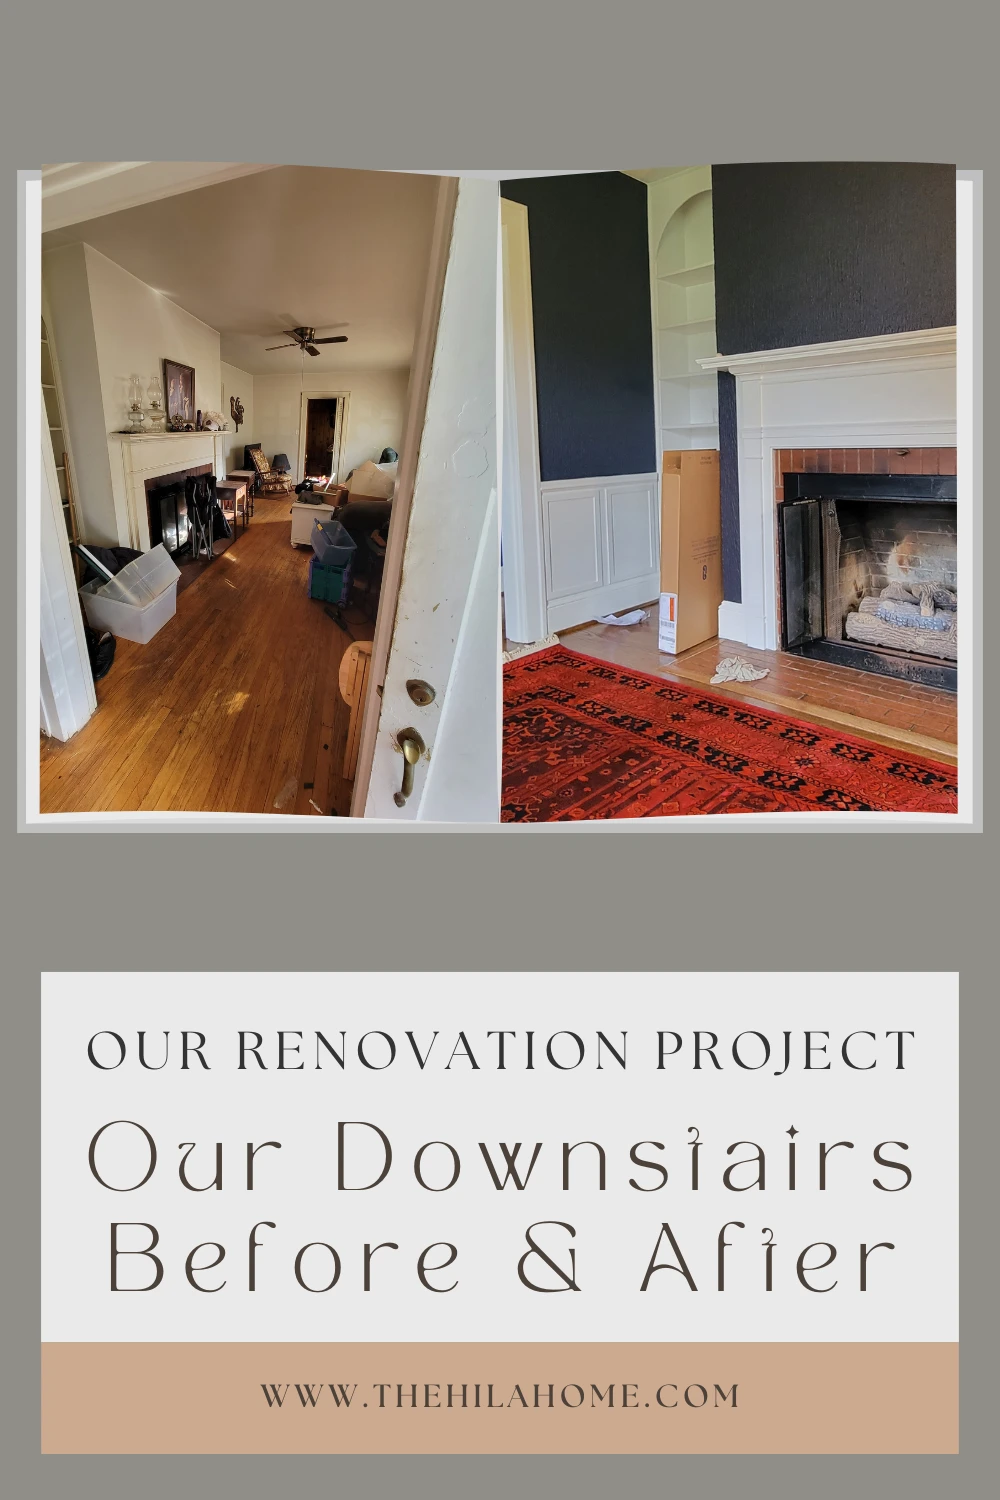 Our Renovation Project Before and After